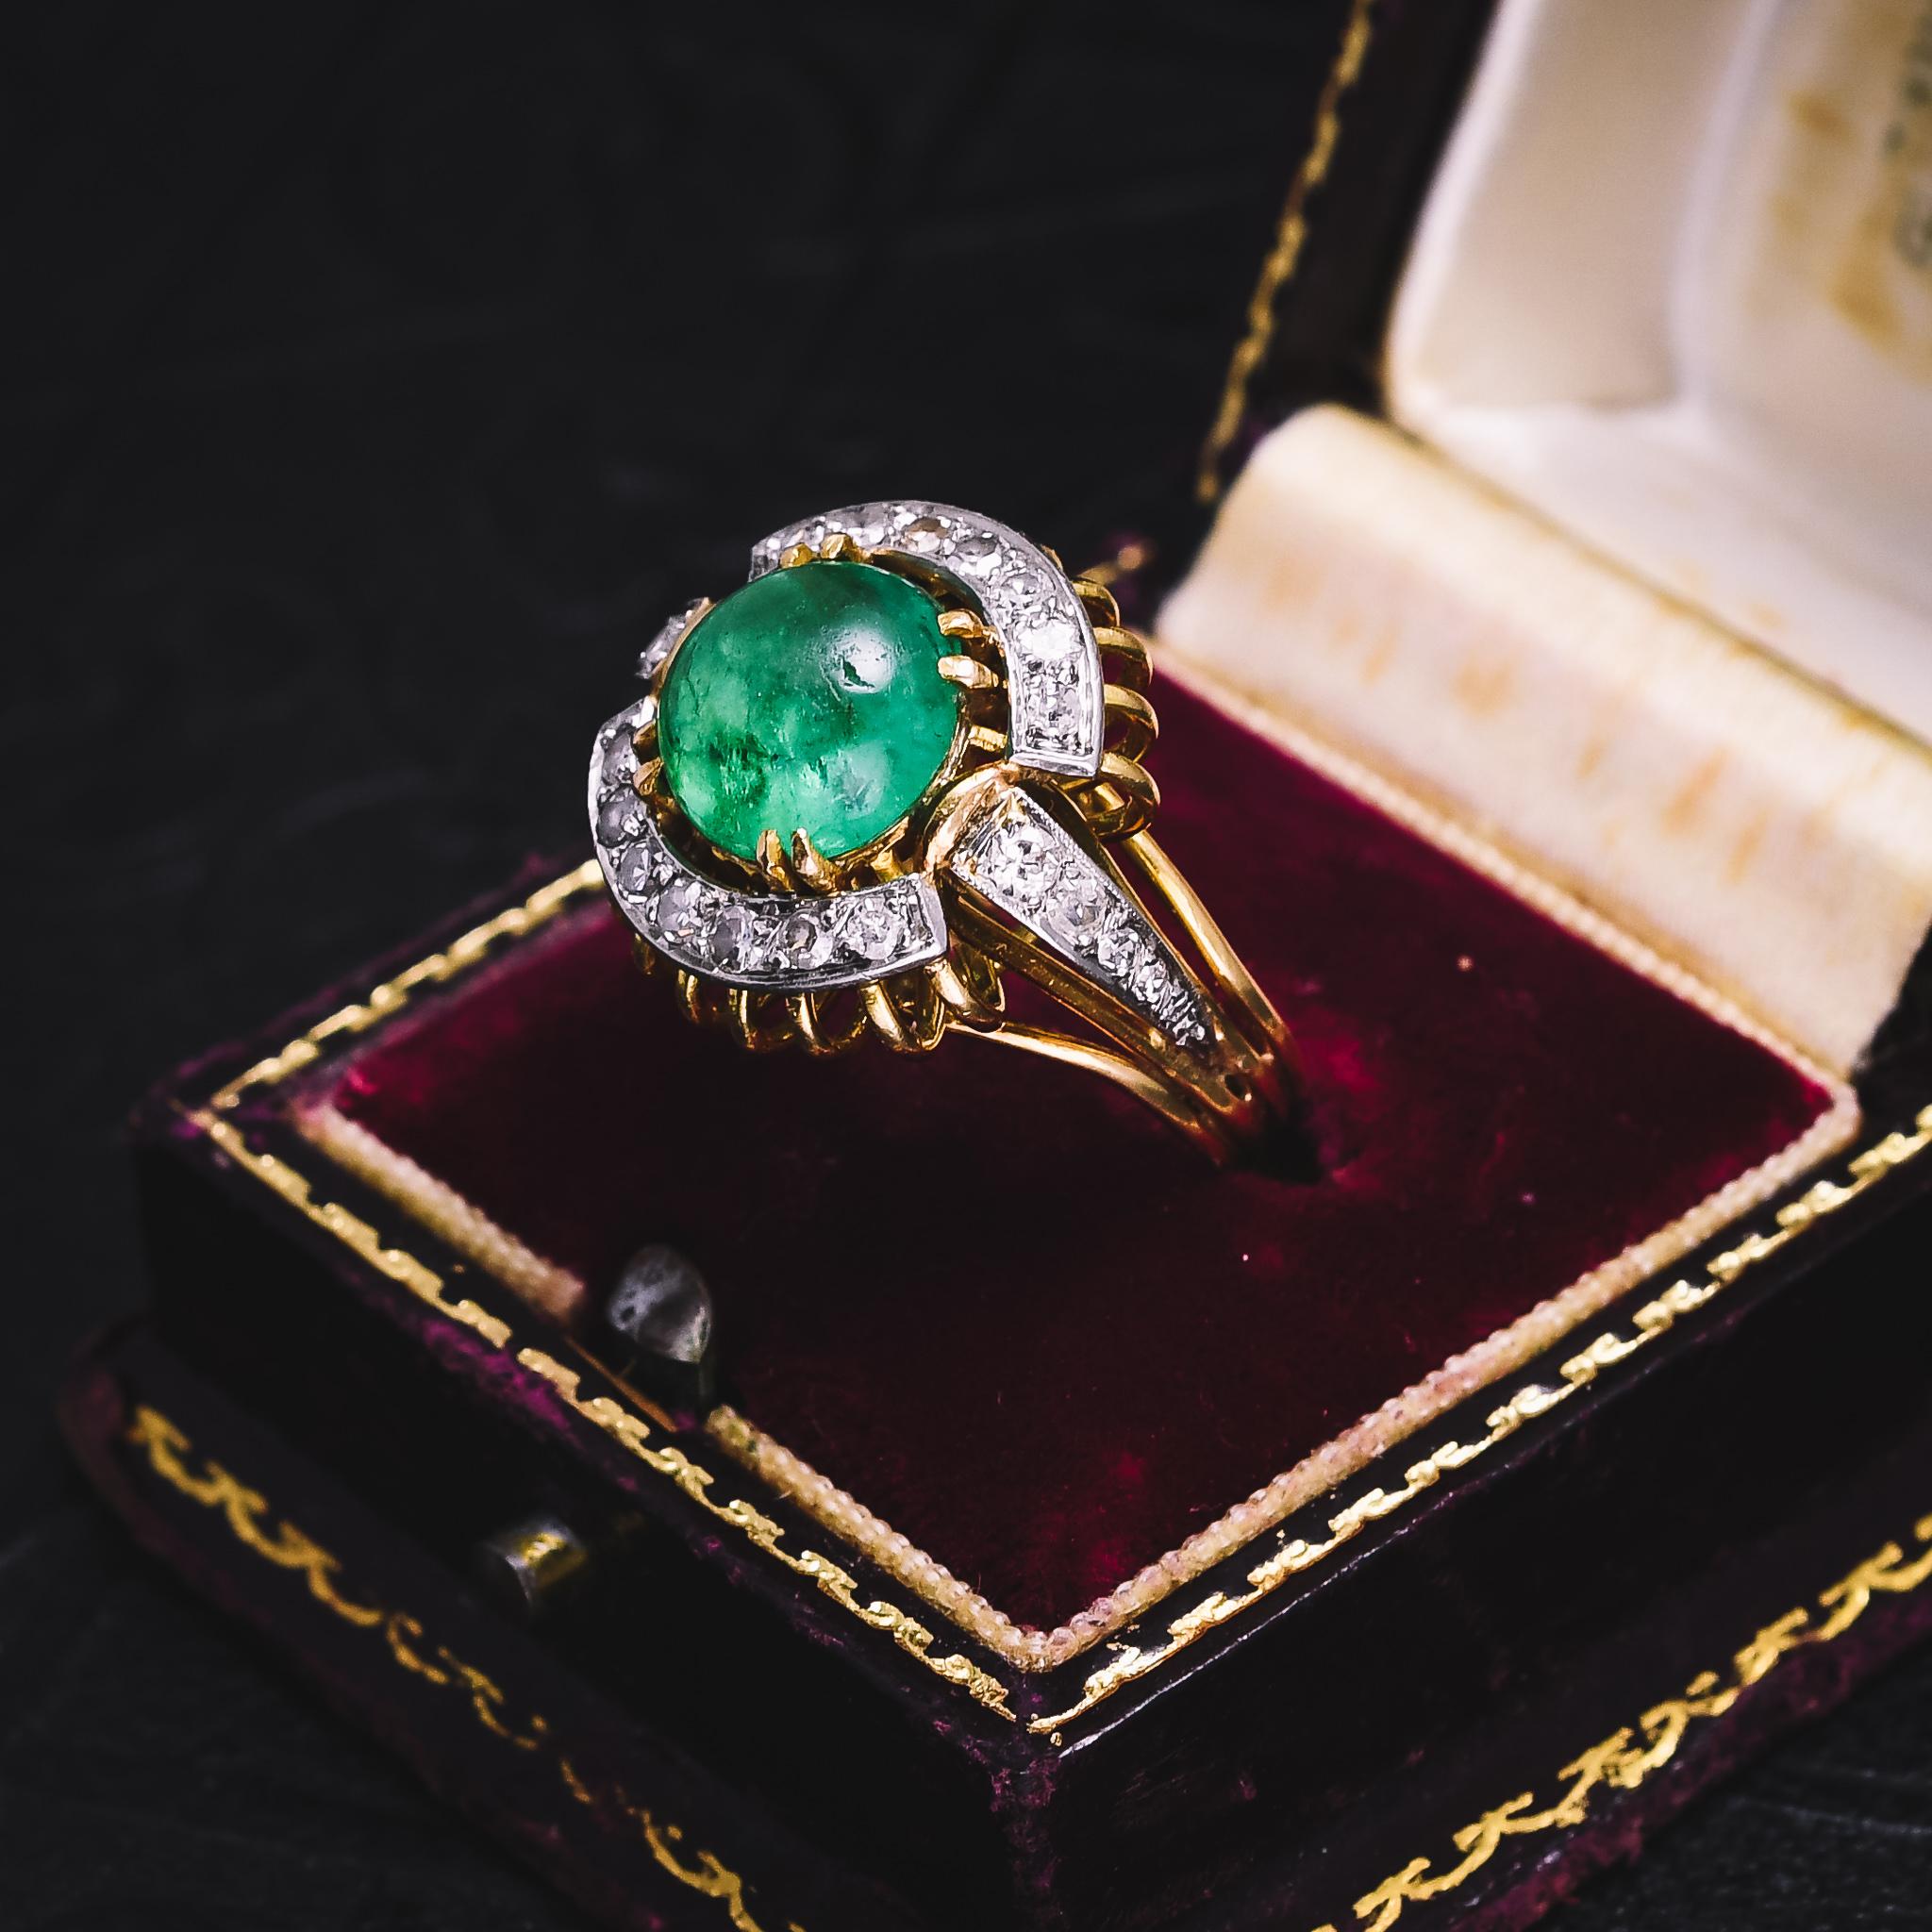 Women's Vintage Space Age Cabochon Emerald Diamond Cocktail Ring